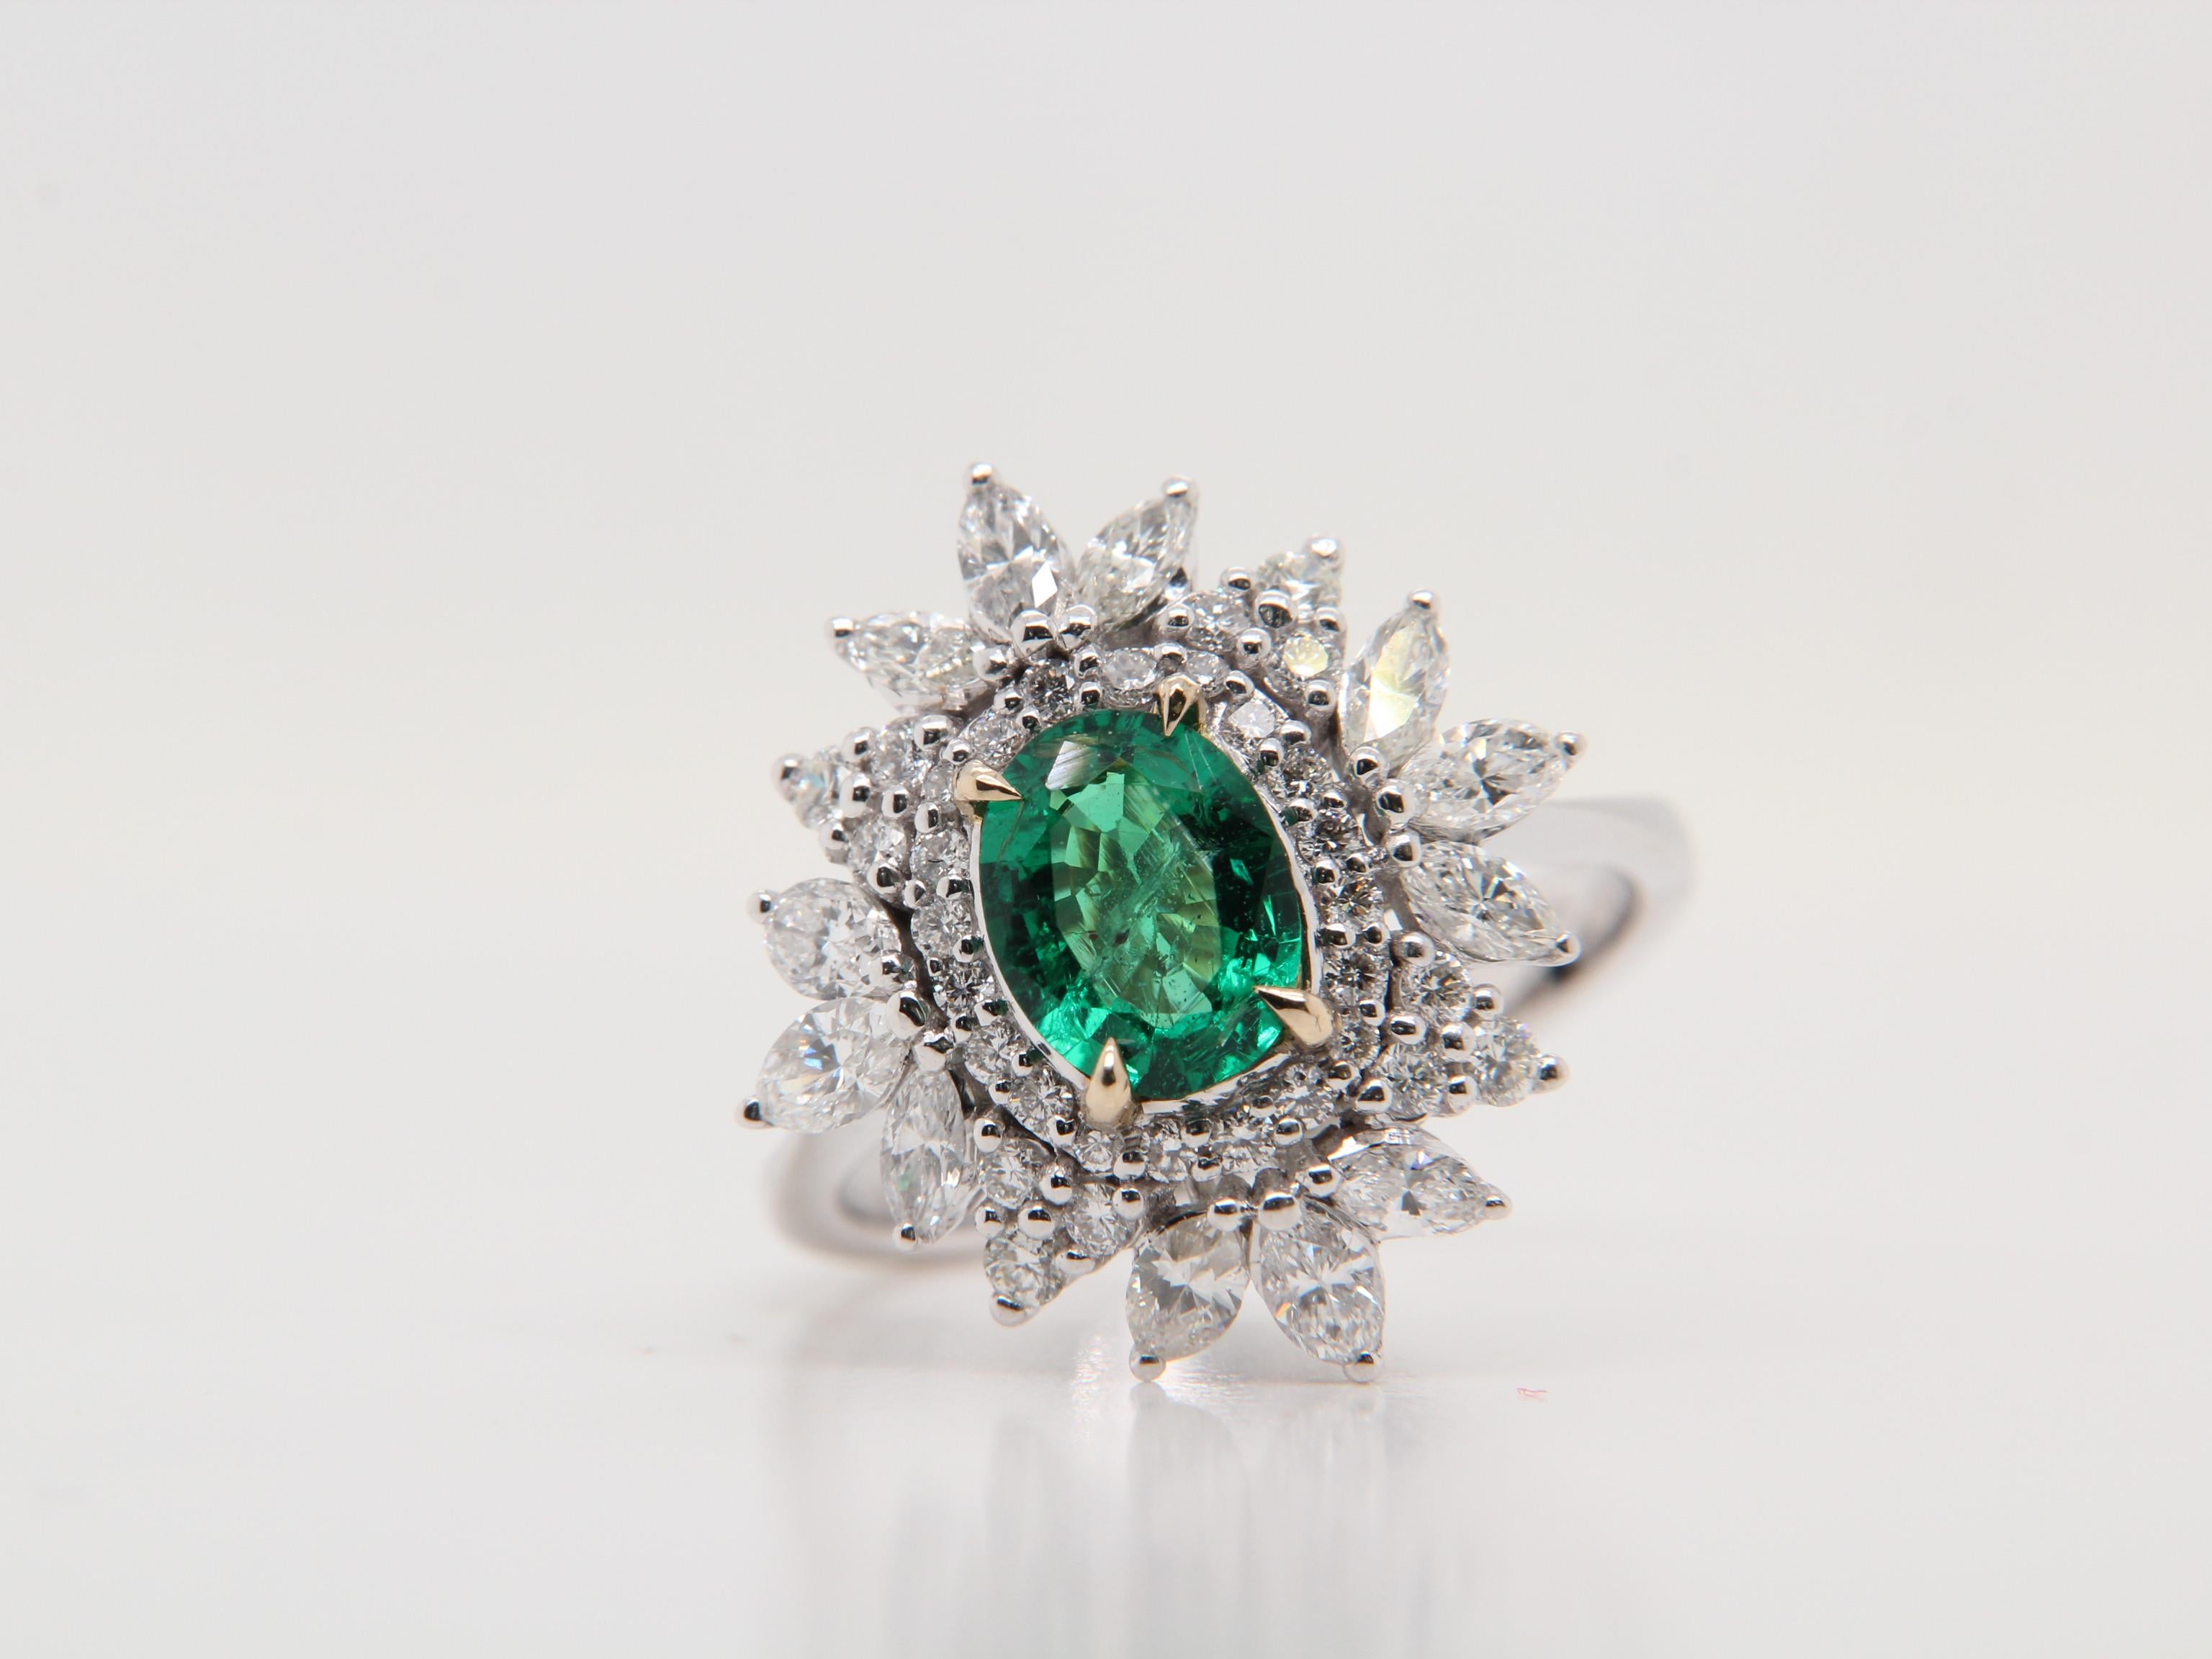 A brand new 1.01 carat emerald ring mounted with diamonds in 18 Karat gold. The total diamond weight is 1.26 carat and the total rings weighs 5.29 grams.